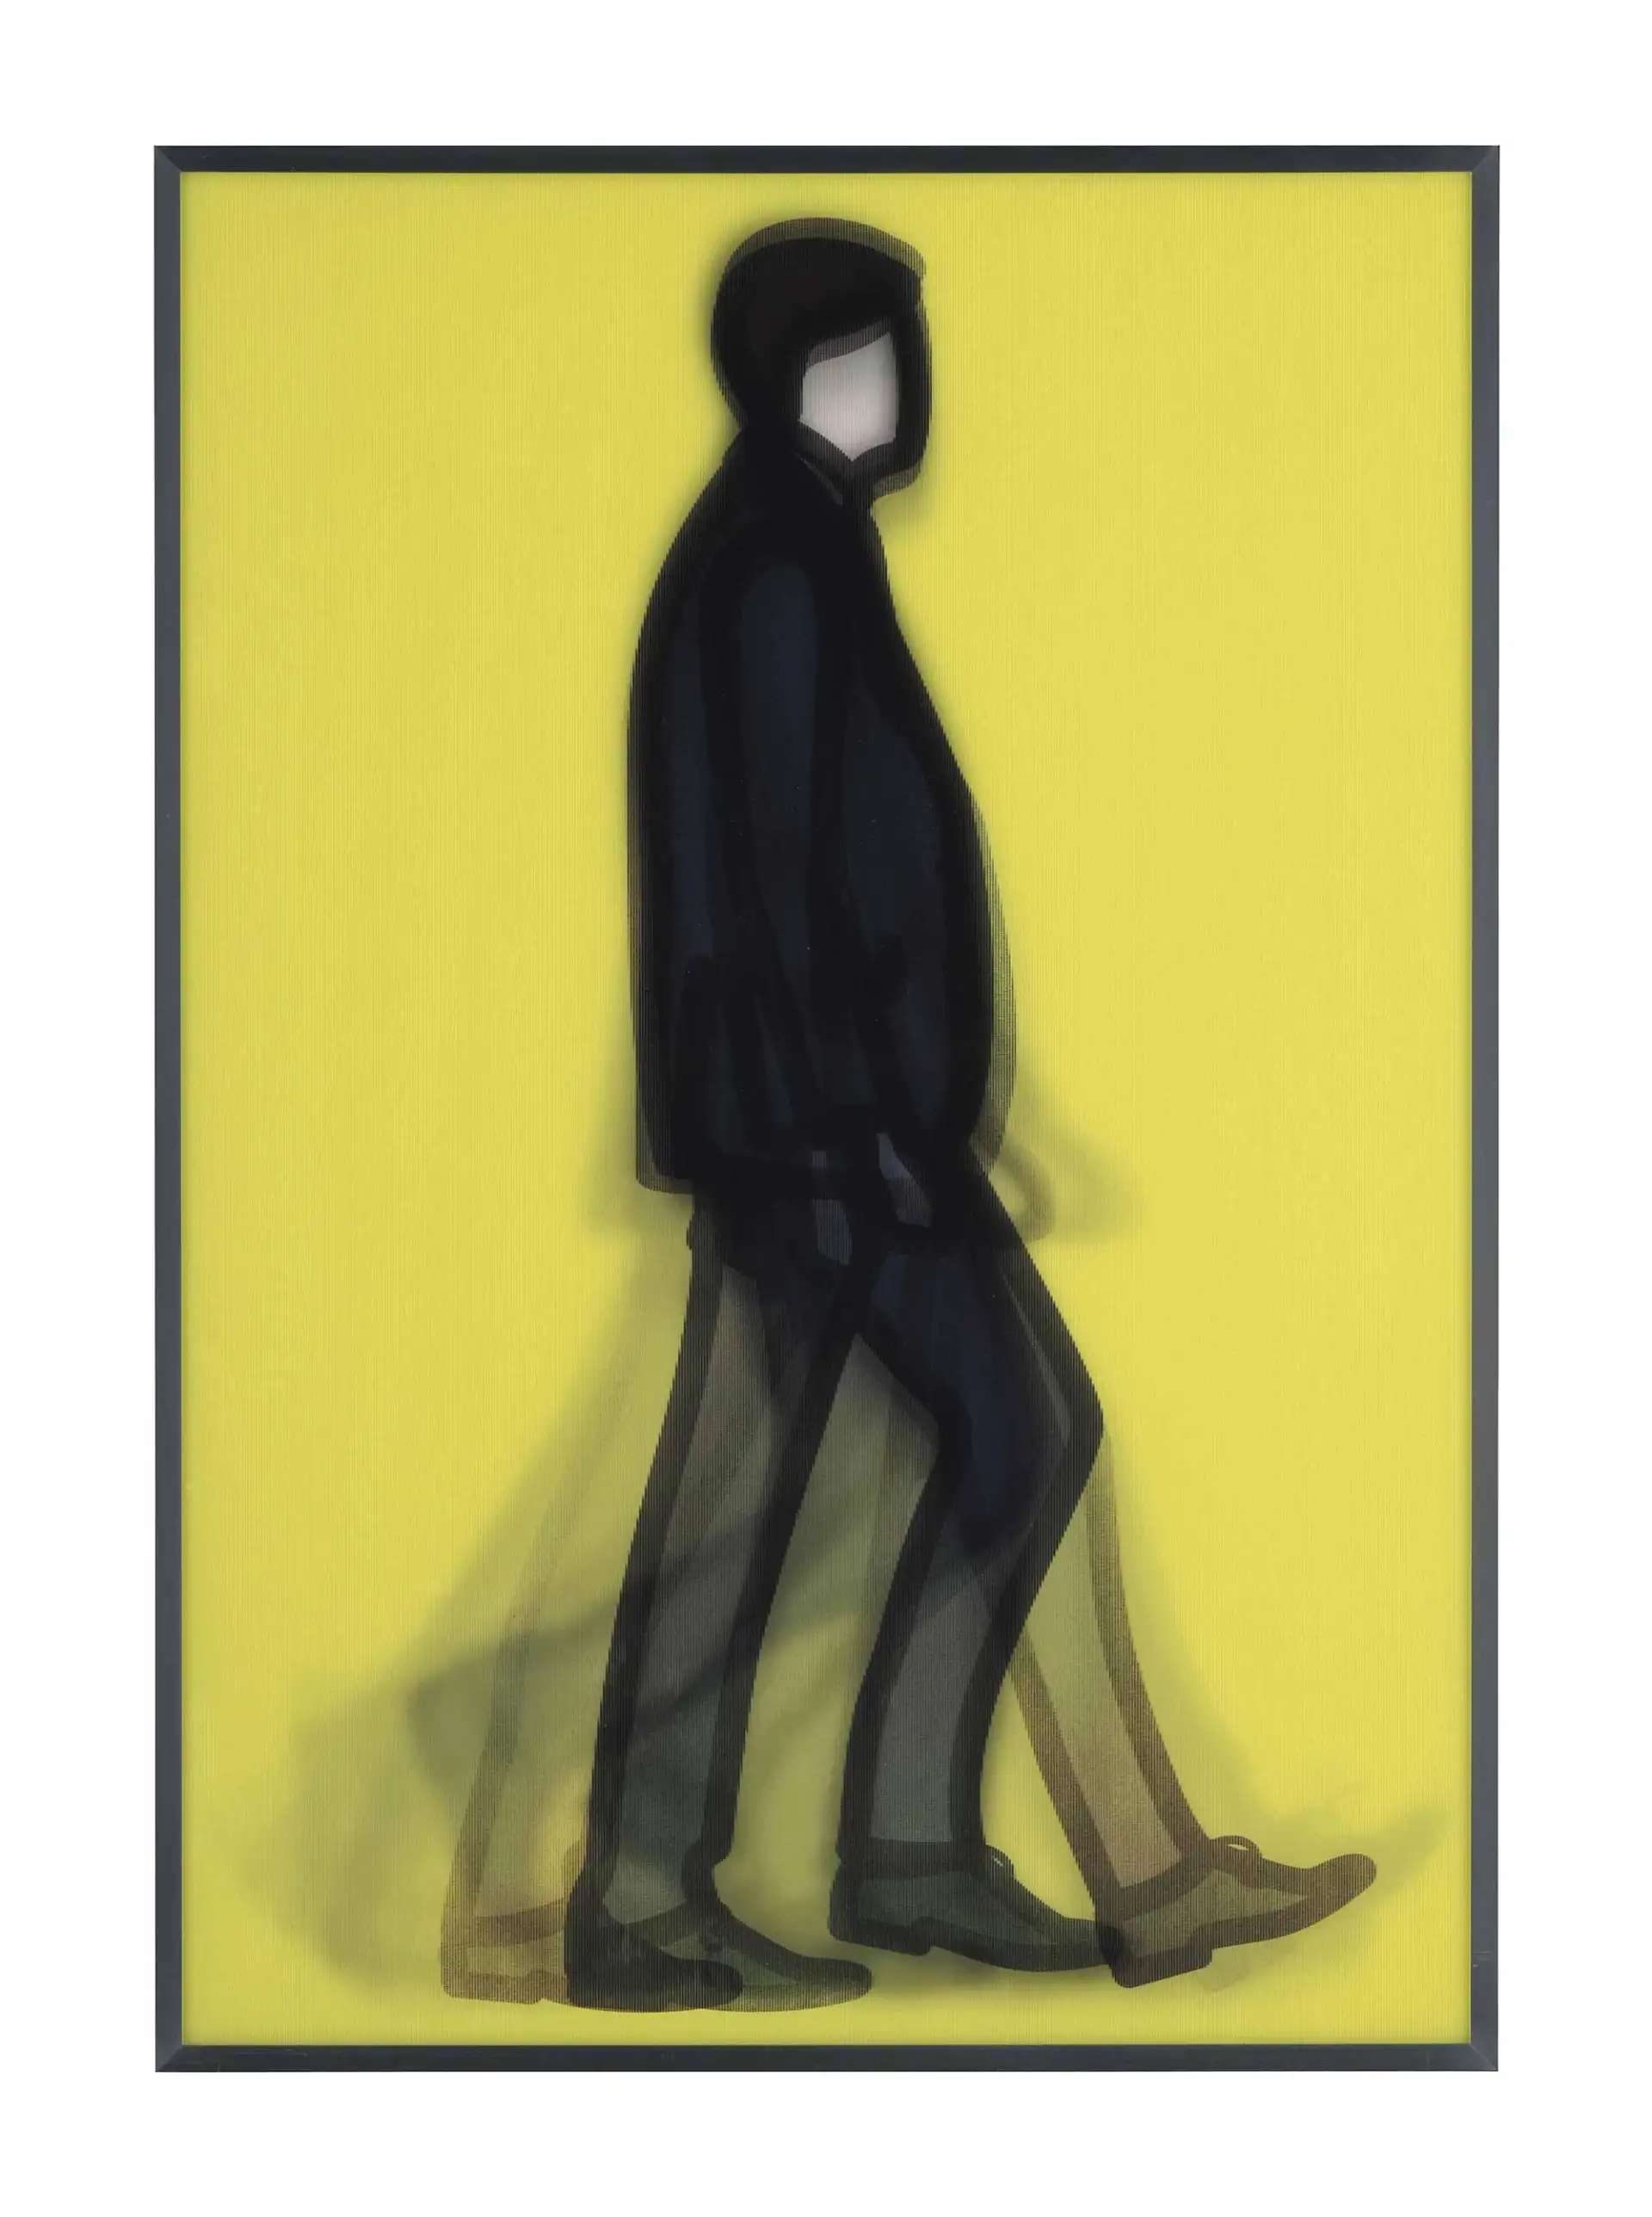 This digital print shows a man in a black suit set against a bright yellow backdrop. The man is depicted from side-on and Opie duplicates the figure’s legs and blurs them which produces an illusion of movement, making it seem as if the man is walking across the composition.